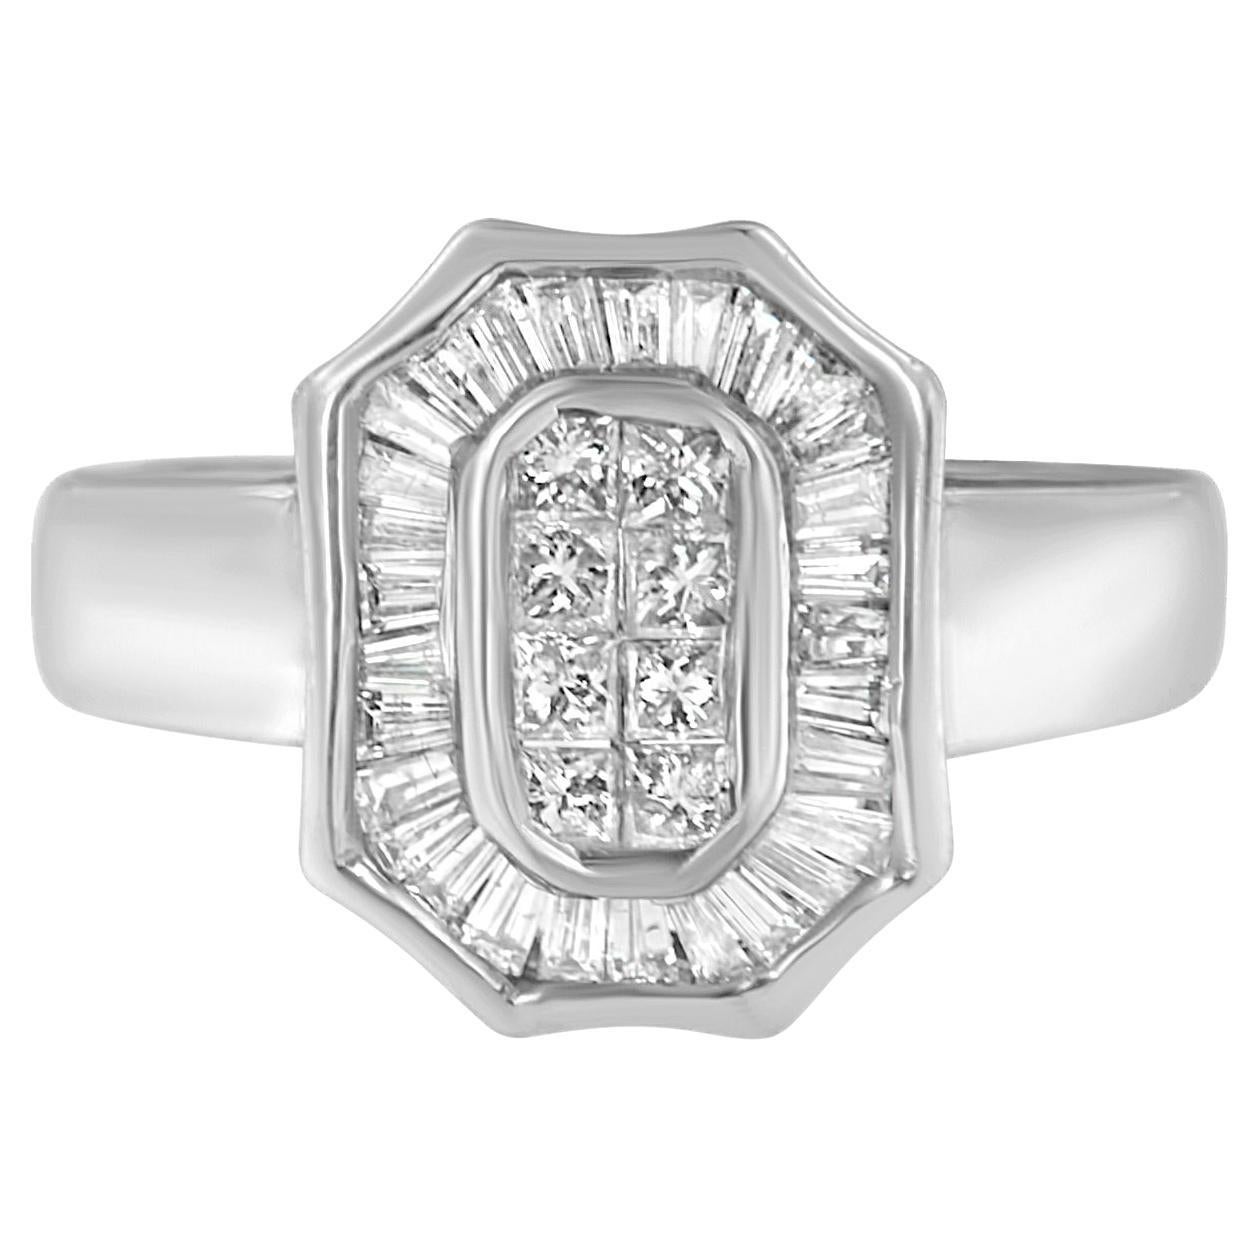 14K White Gold 1.0 Carat Diamond Art Deco Style Cocktail Ring For Sale